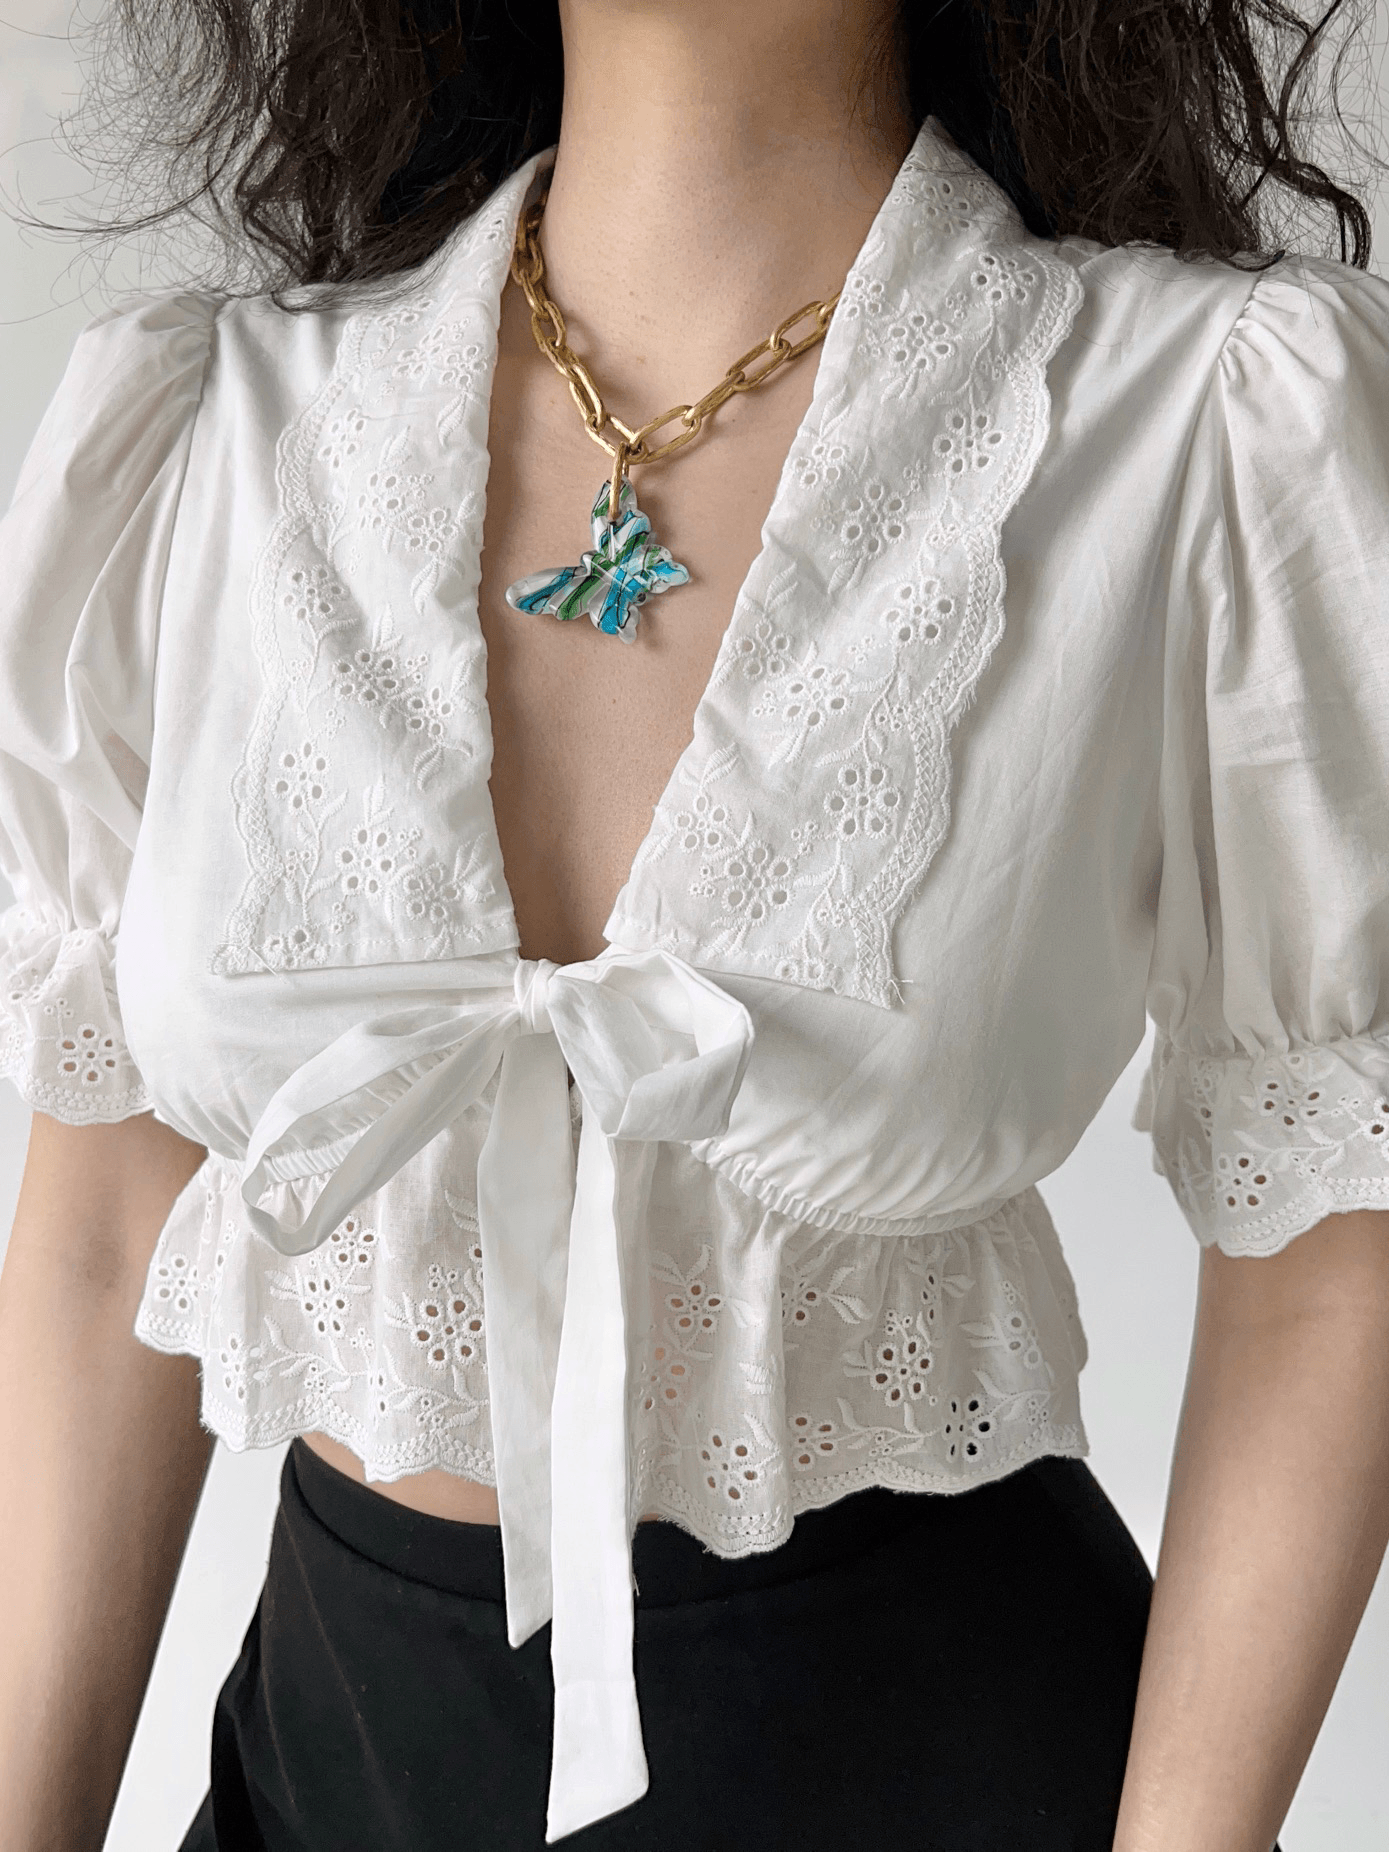 lovevop French Court Style Puff Sleeve Embroidered Tie White Shirt